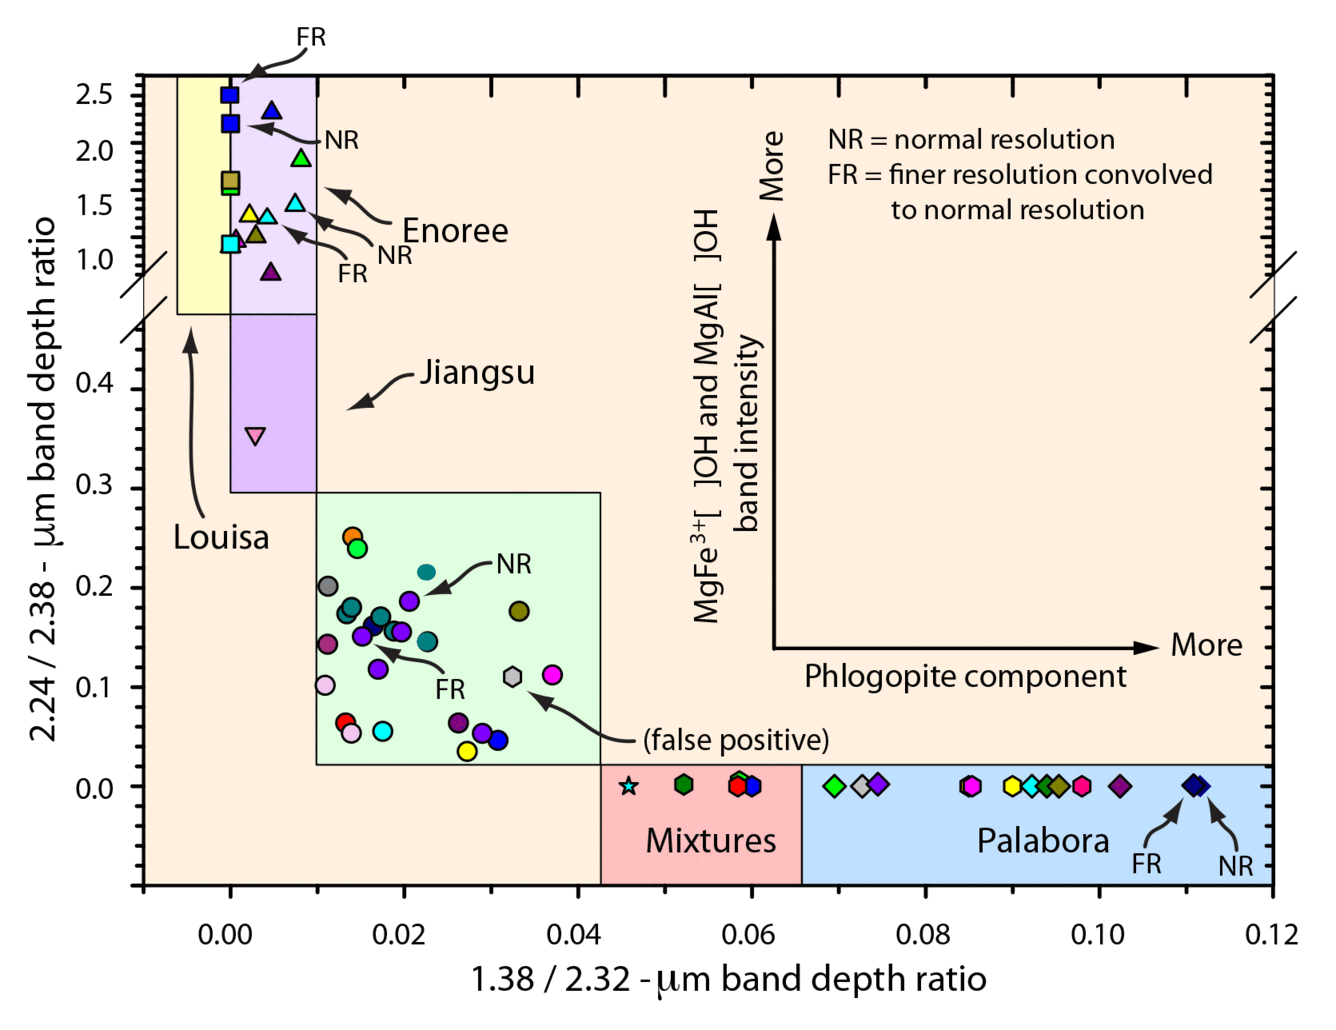 Mine sources of expanded vermiculite ore samples.